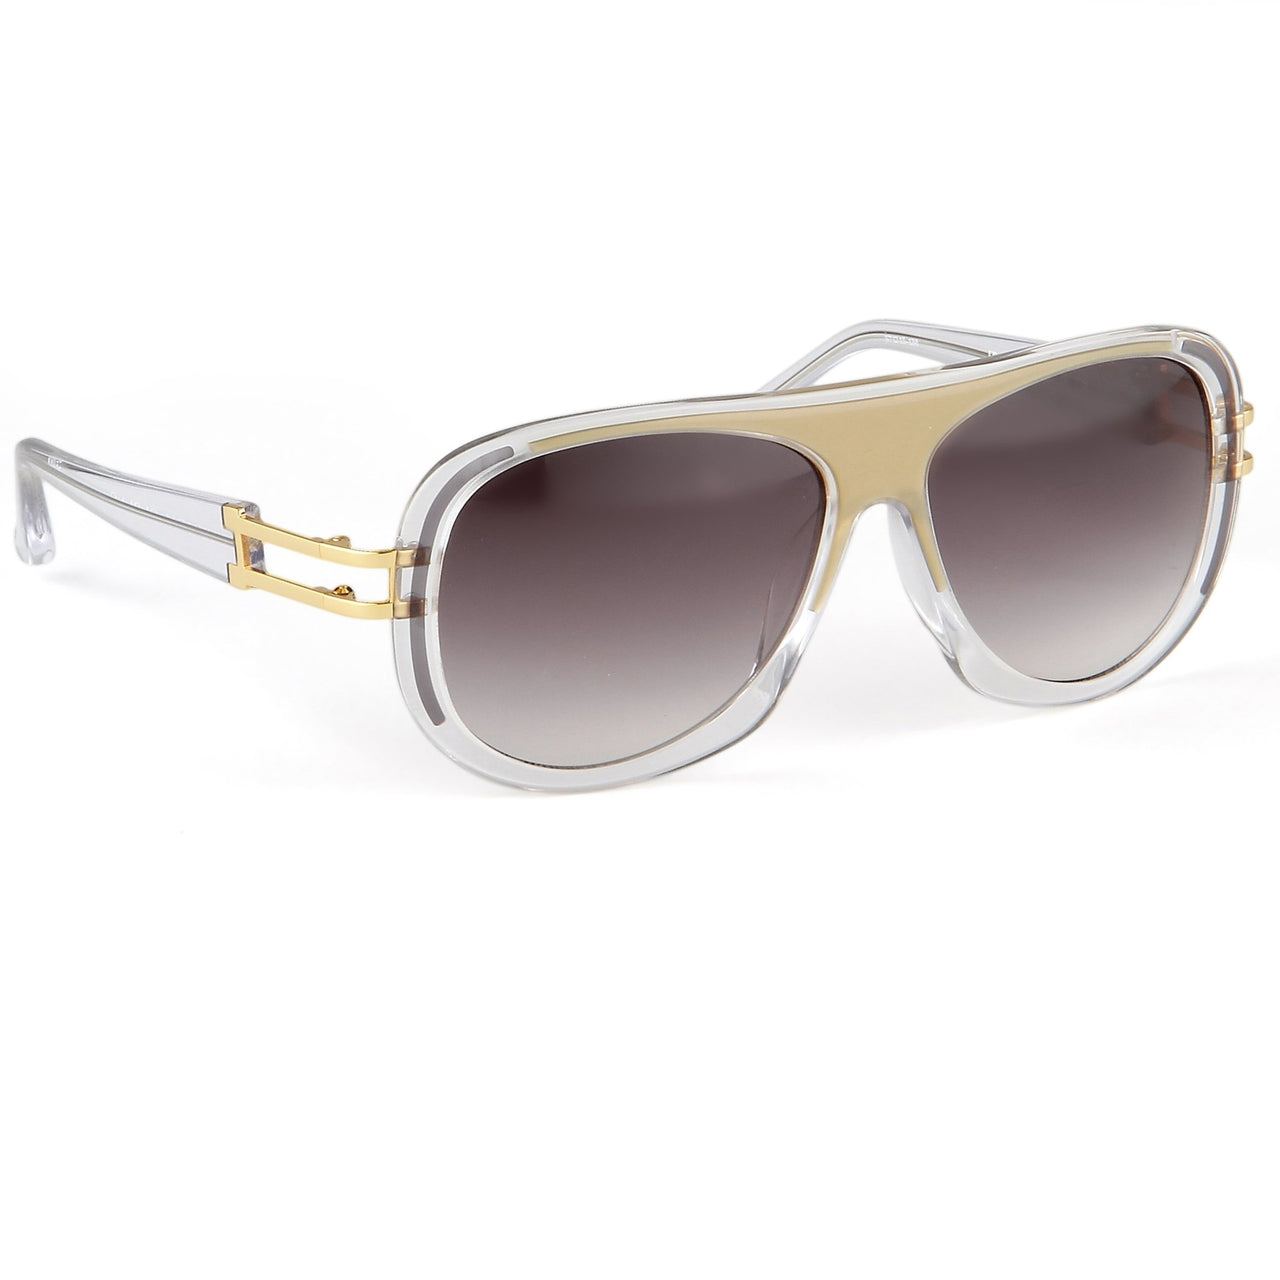 Prabal Gurung Sunglasses Female Aviator Olive and Clear Acetate CAT3 Grey Lenses PG10C1SUN - Watches & Crystals